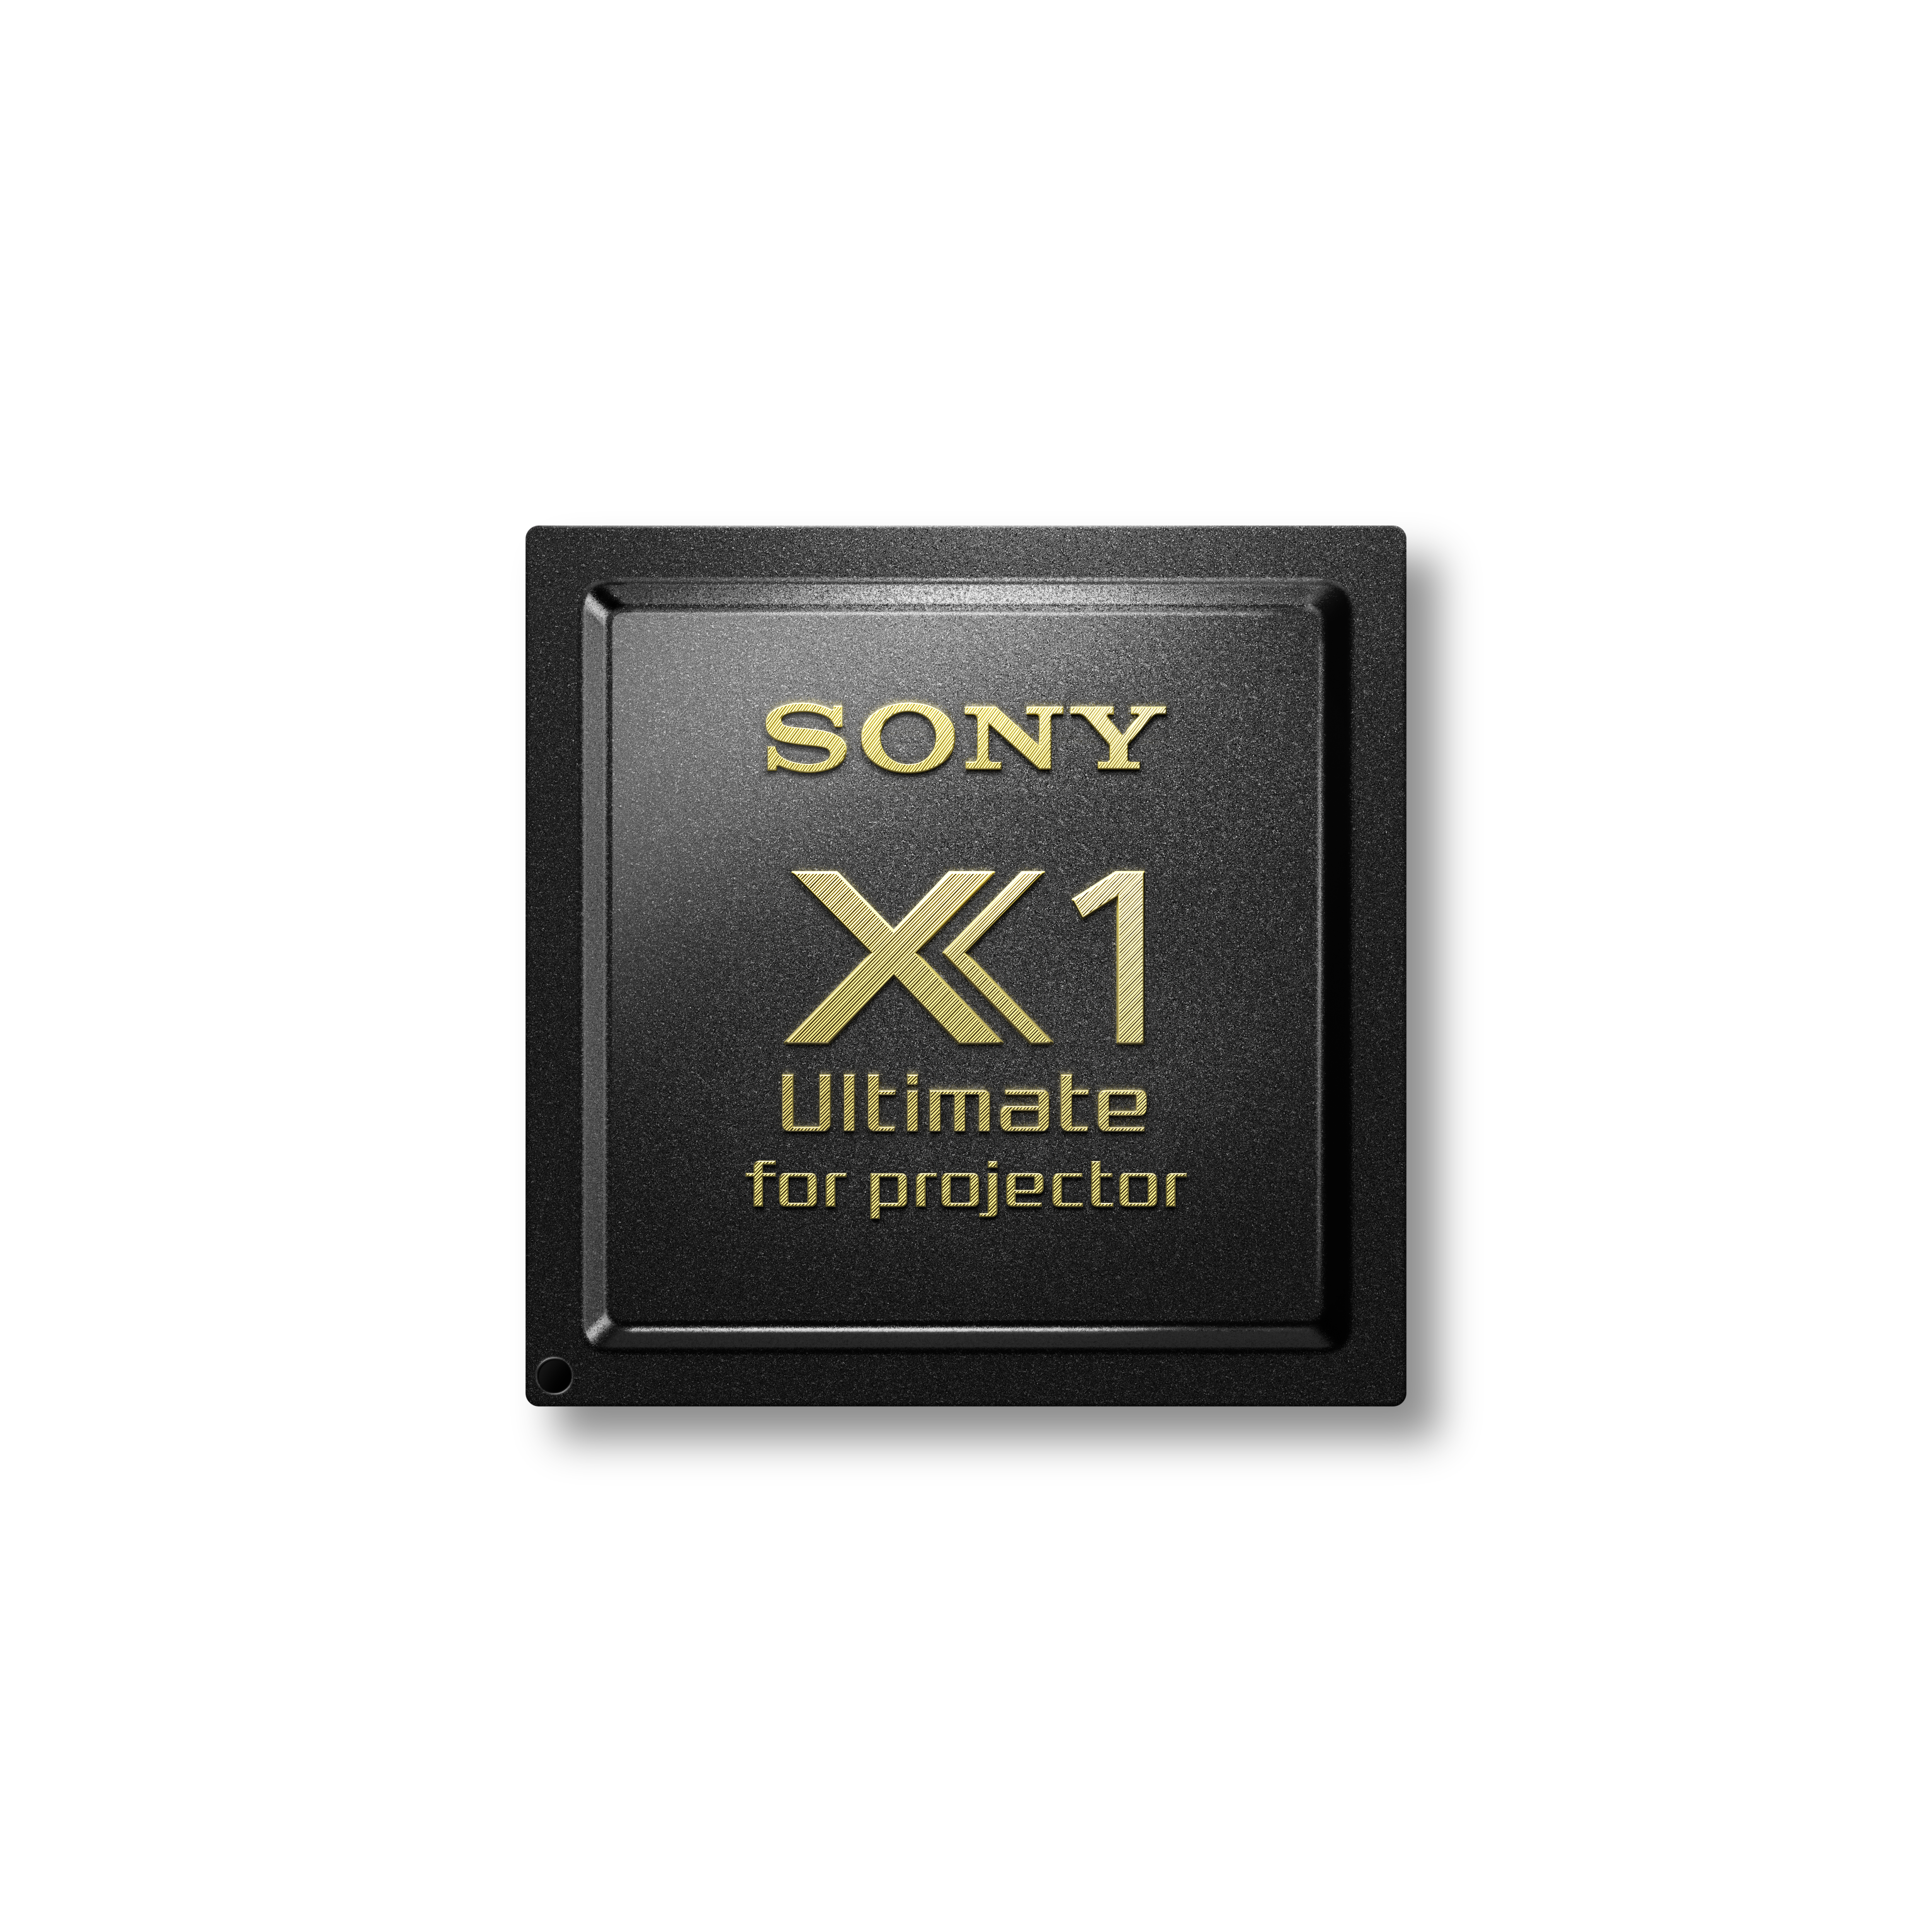 X1 Ultimate for projector Chip front final